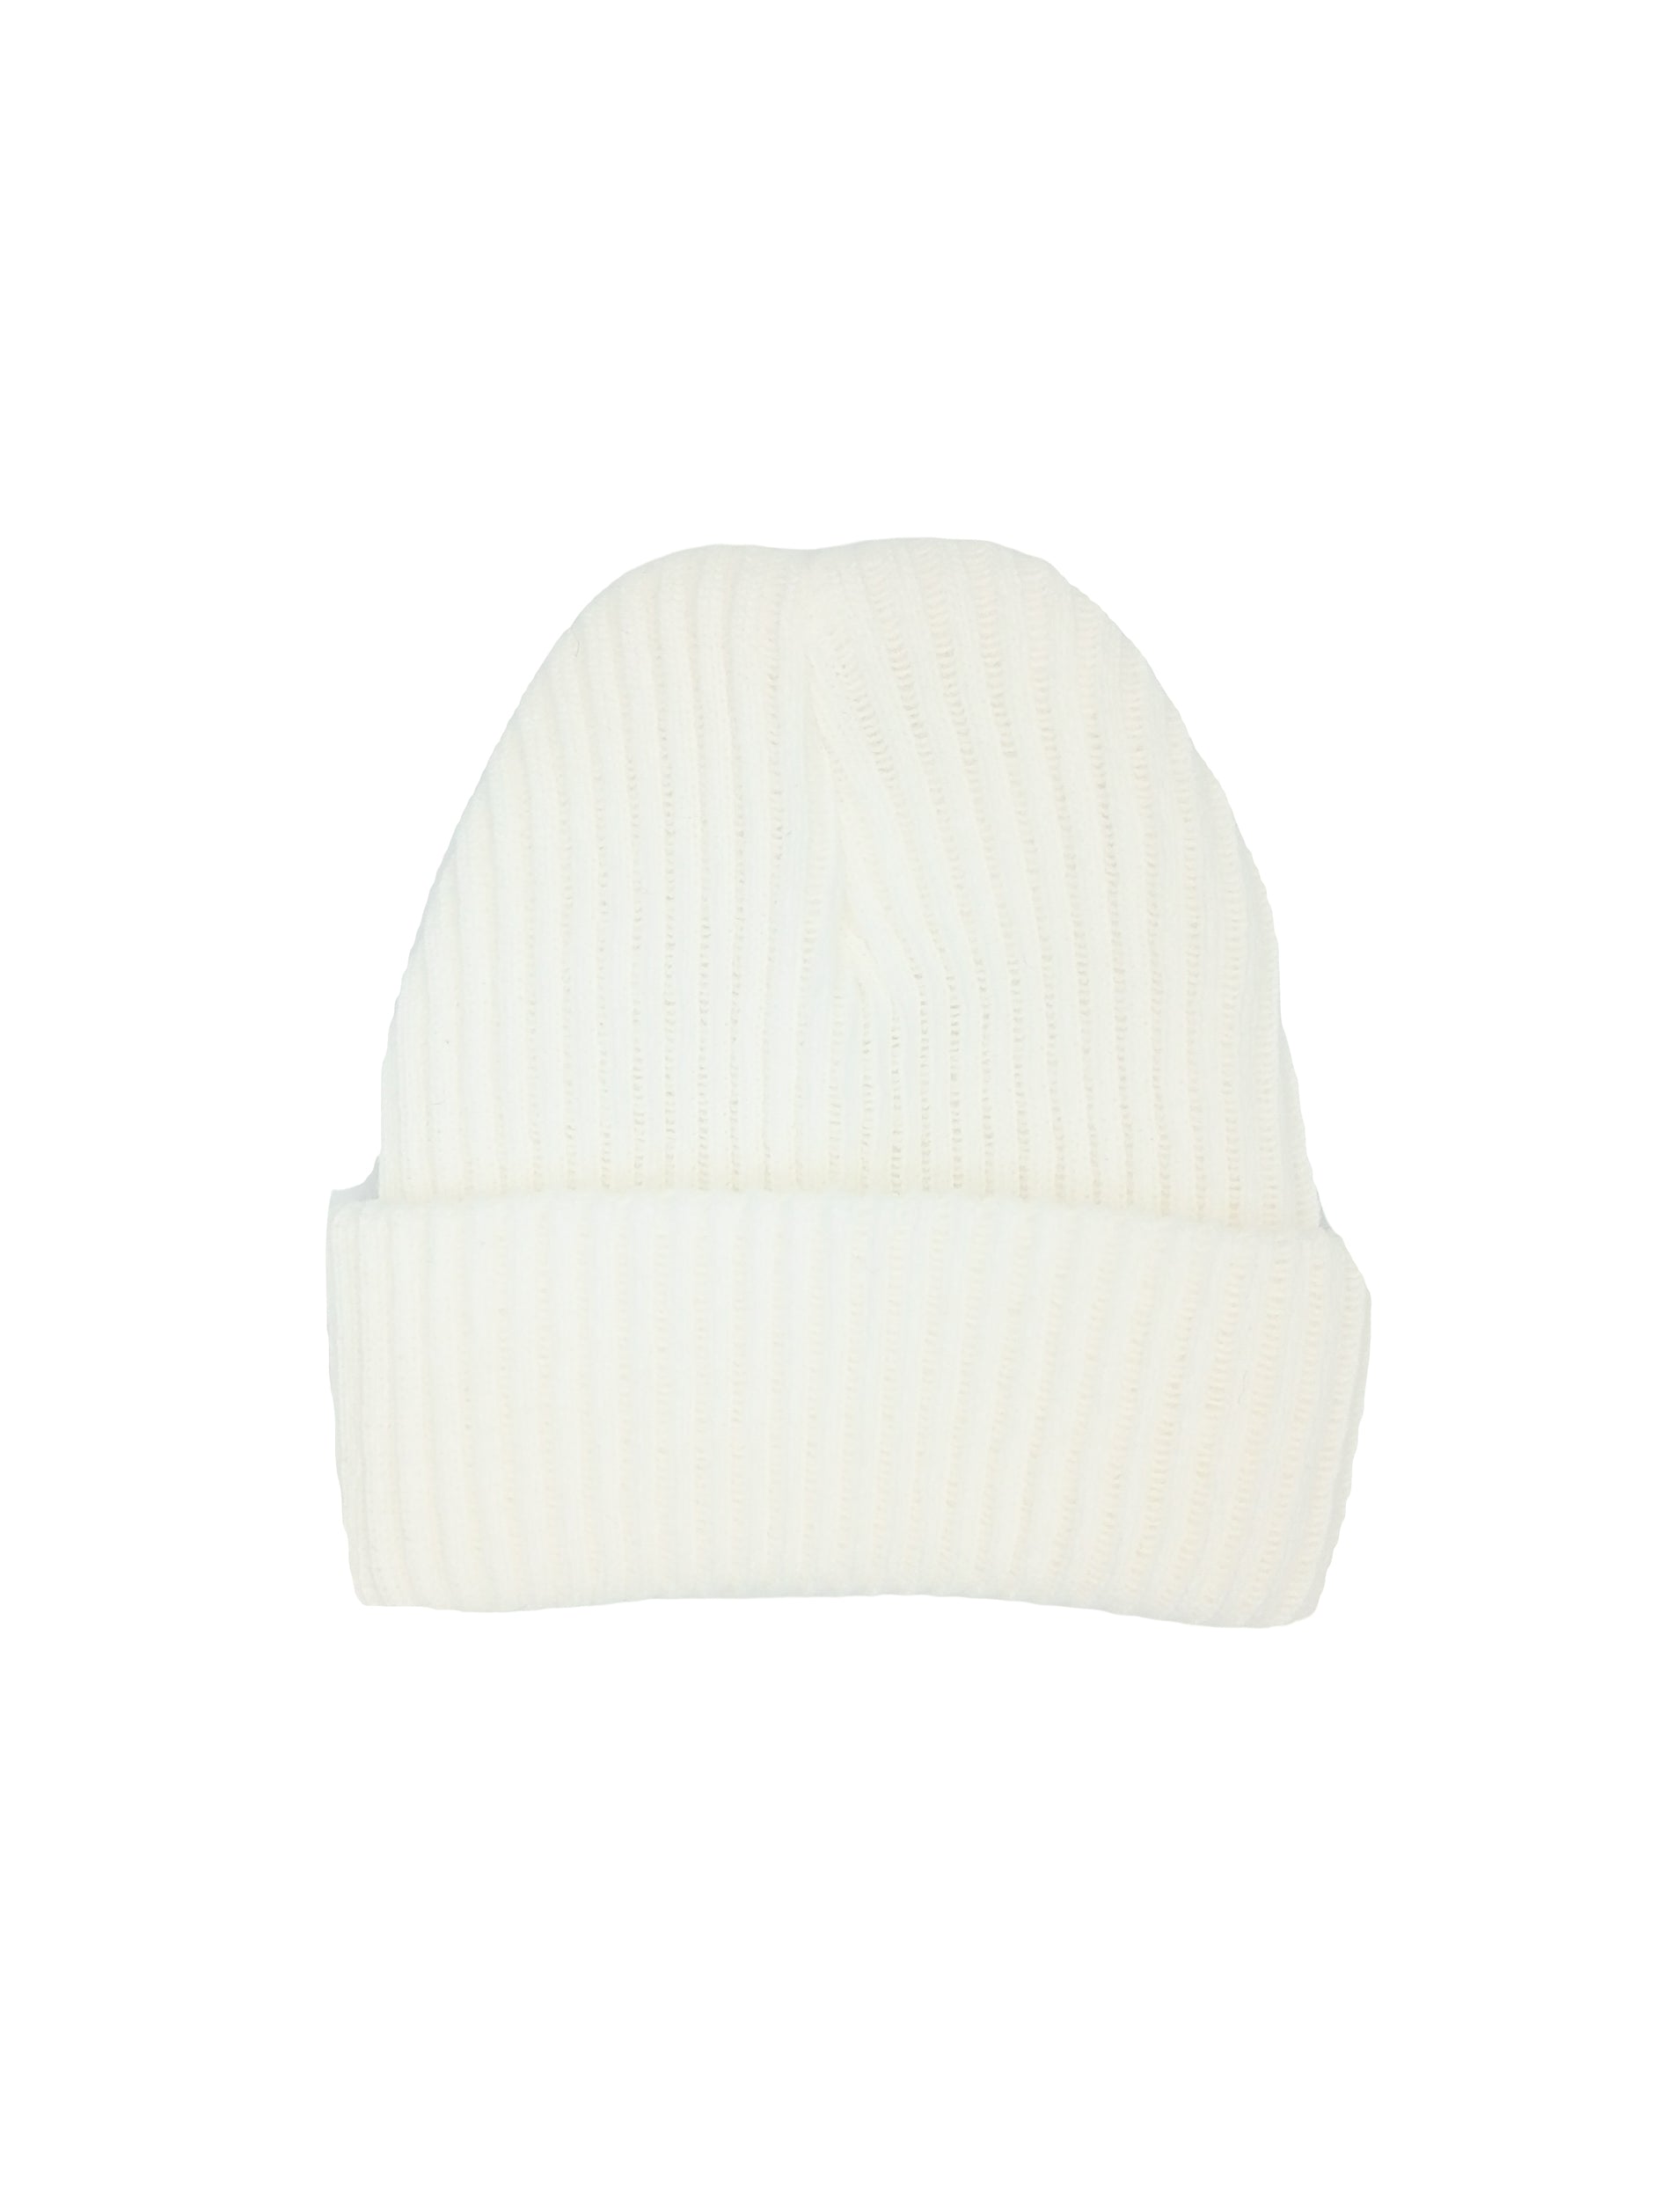 Premature Baby White Knitted Hat Hat Little Mouse Baby Clothing and Gifts Ltd 